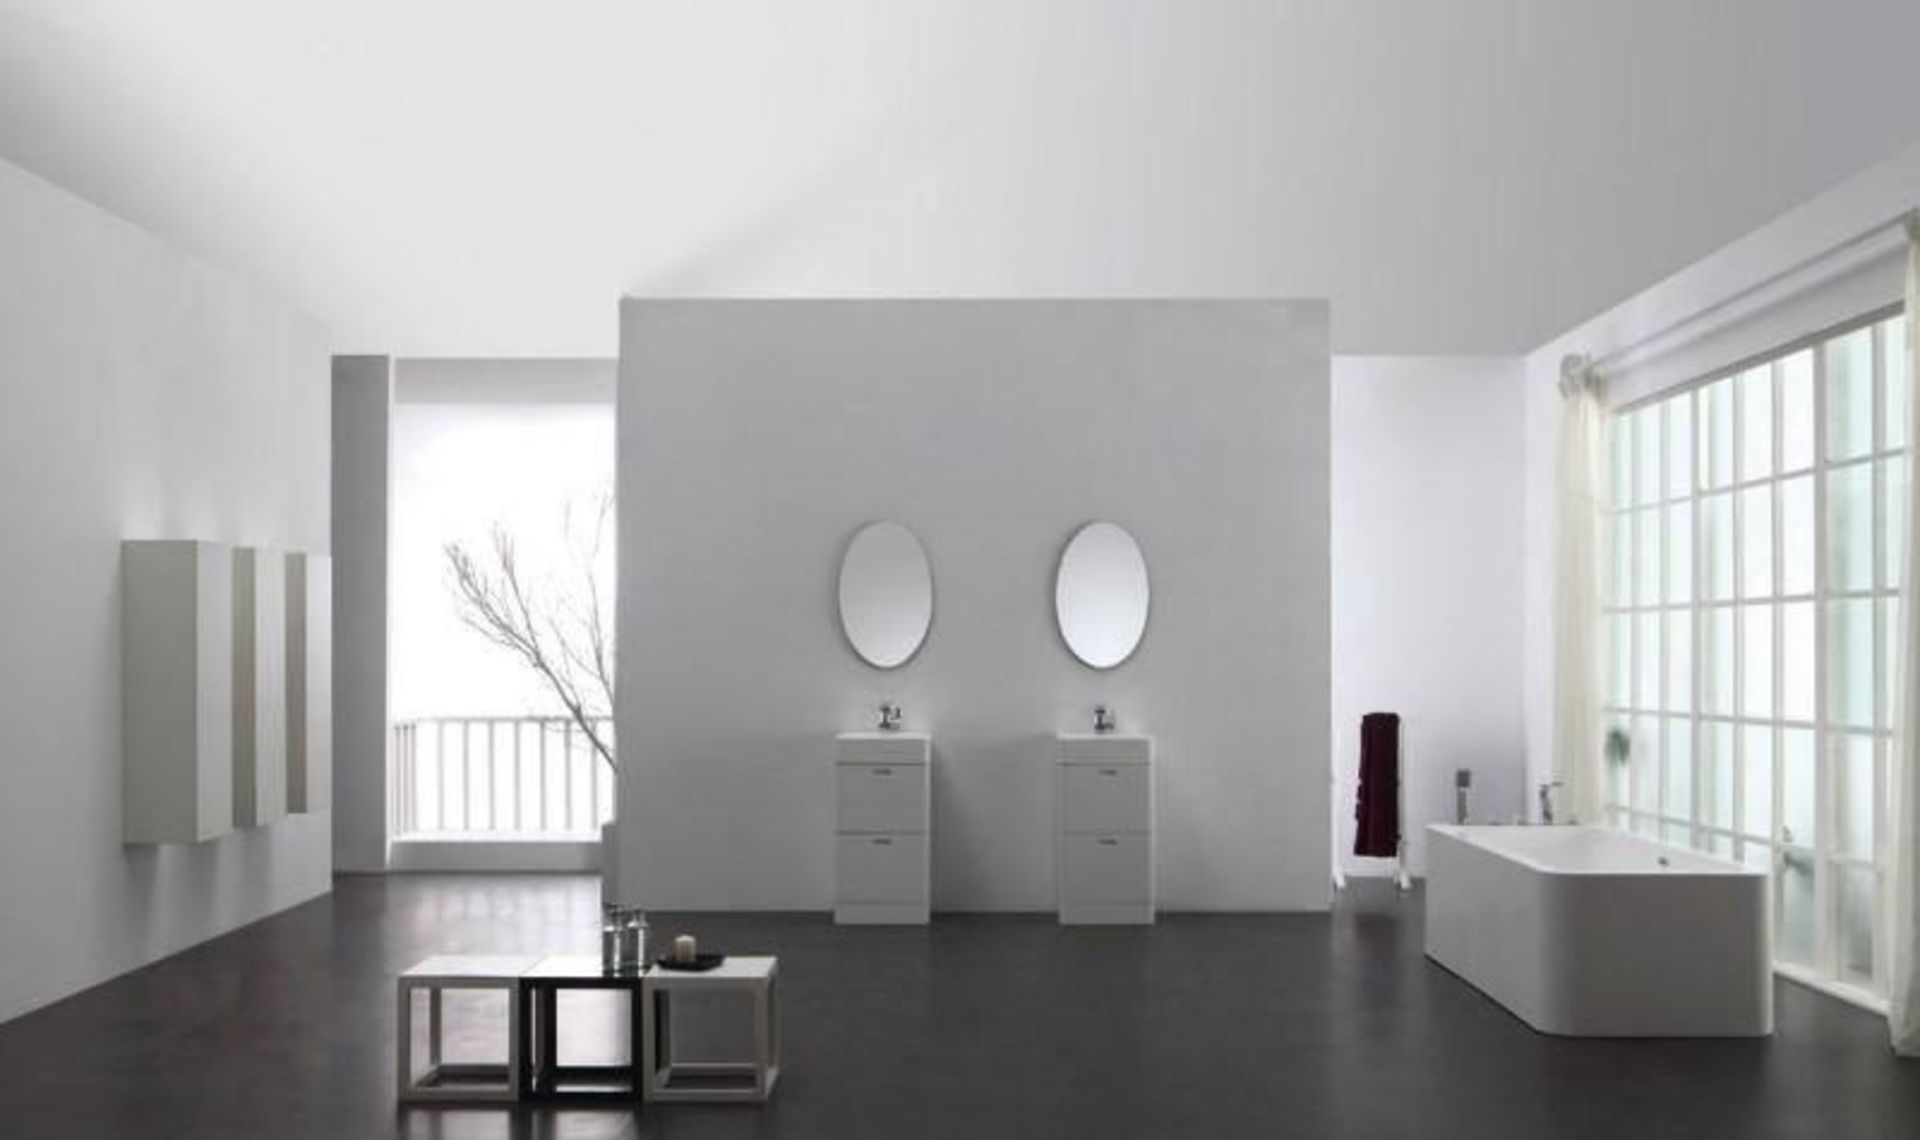 1 x Stylish Bathroom Oval Mirror 45 with top light - A-Grade - Ref:AMR14-045 - CL170 - Location: Not - Image 2 of 4